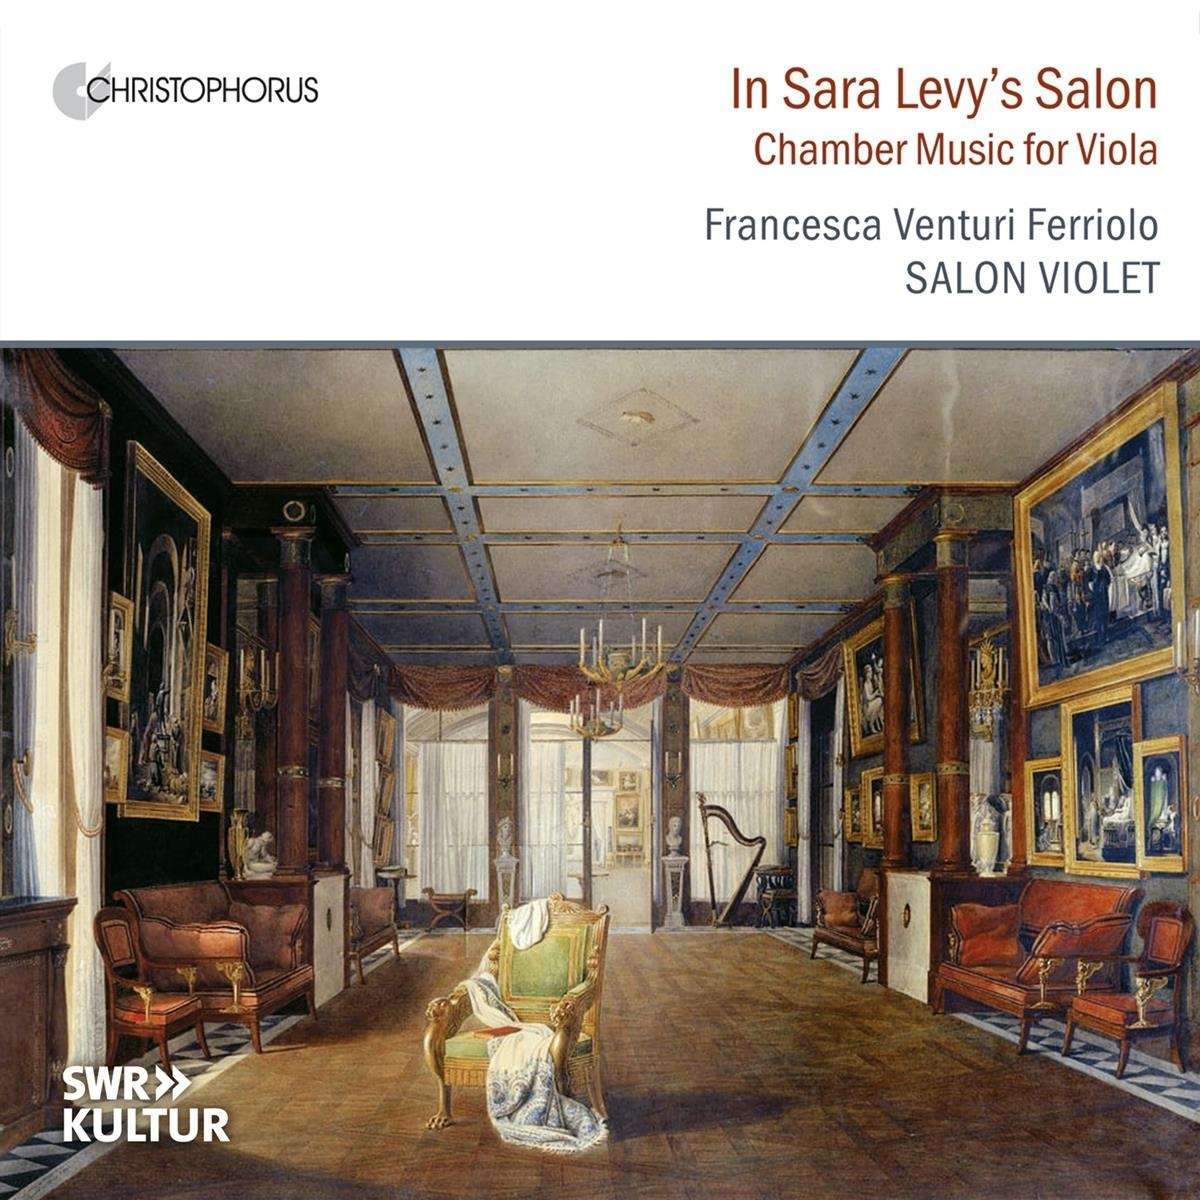 IN SARAH LEVY'S SALON - CHAMBER MUSIC FOR VIOLA